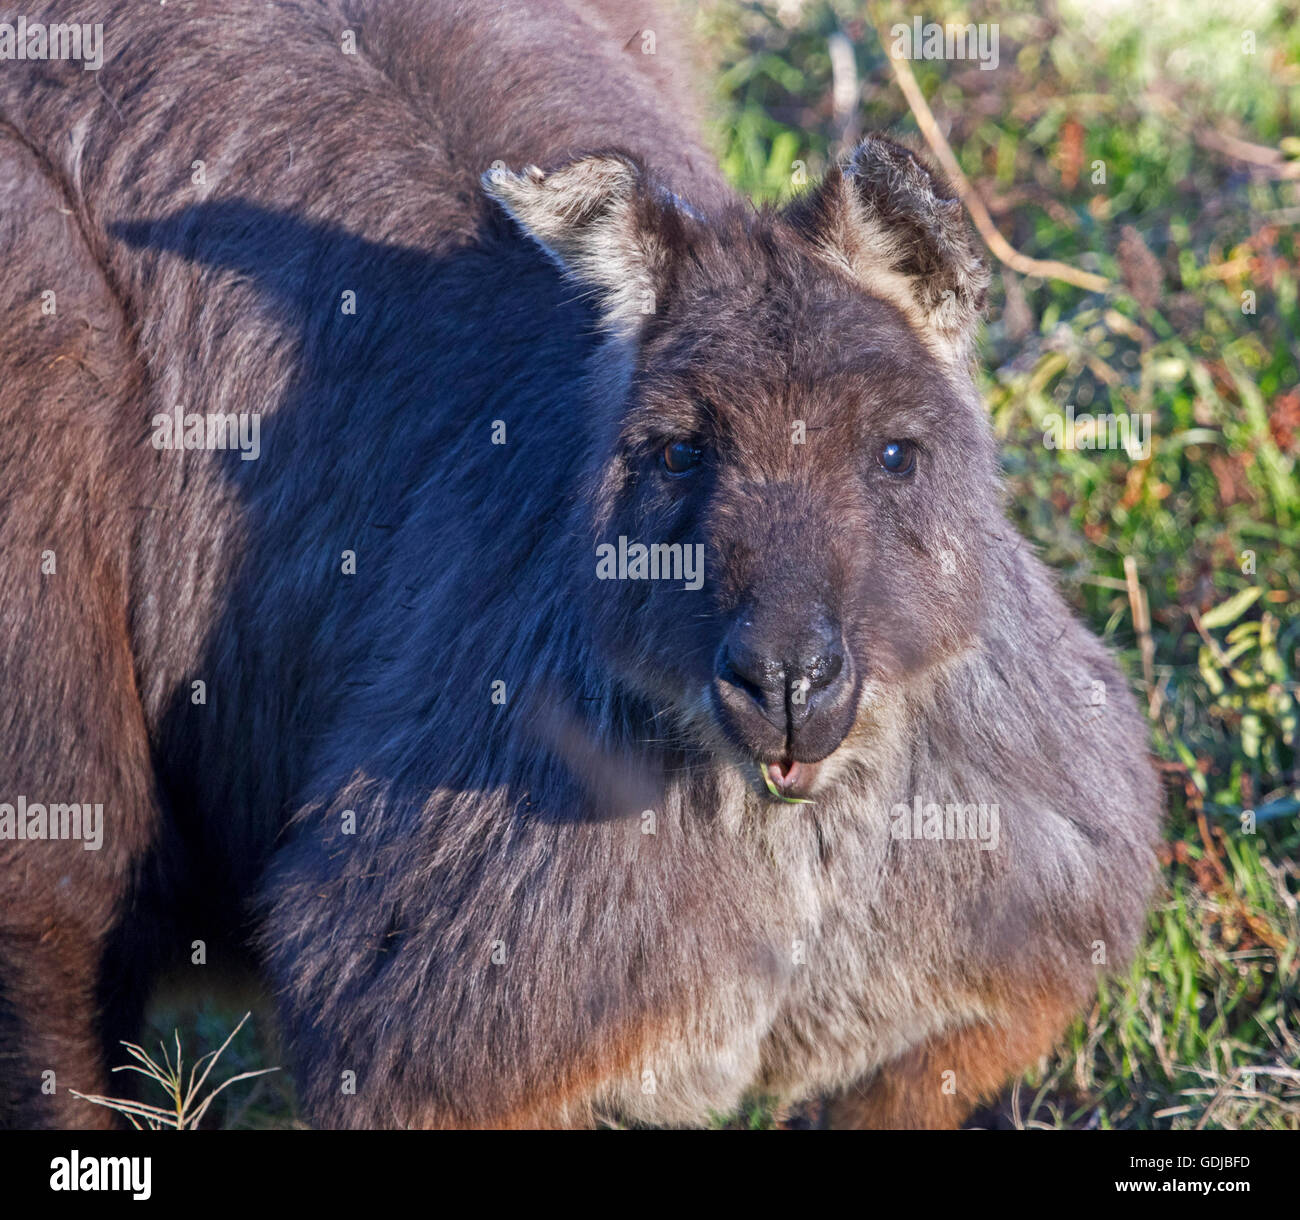 Beautiful face of old wallaroo, Macropus robustus in the wild with gleaming eyes & long dark grey/brown fur staring at camera with alert expression Stock Photo